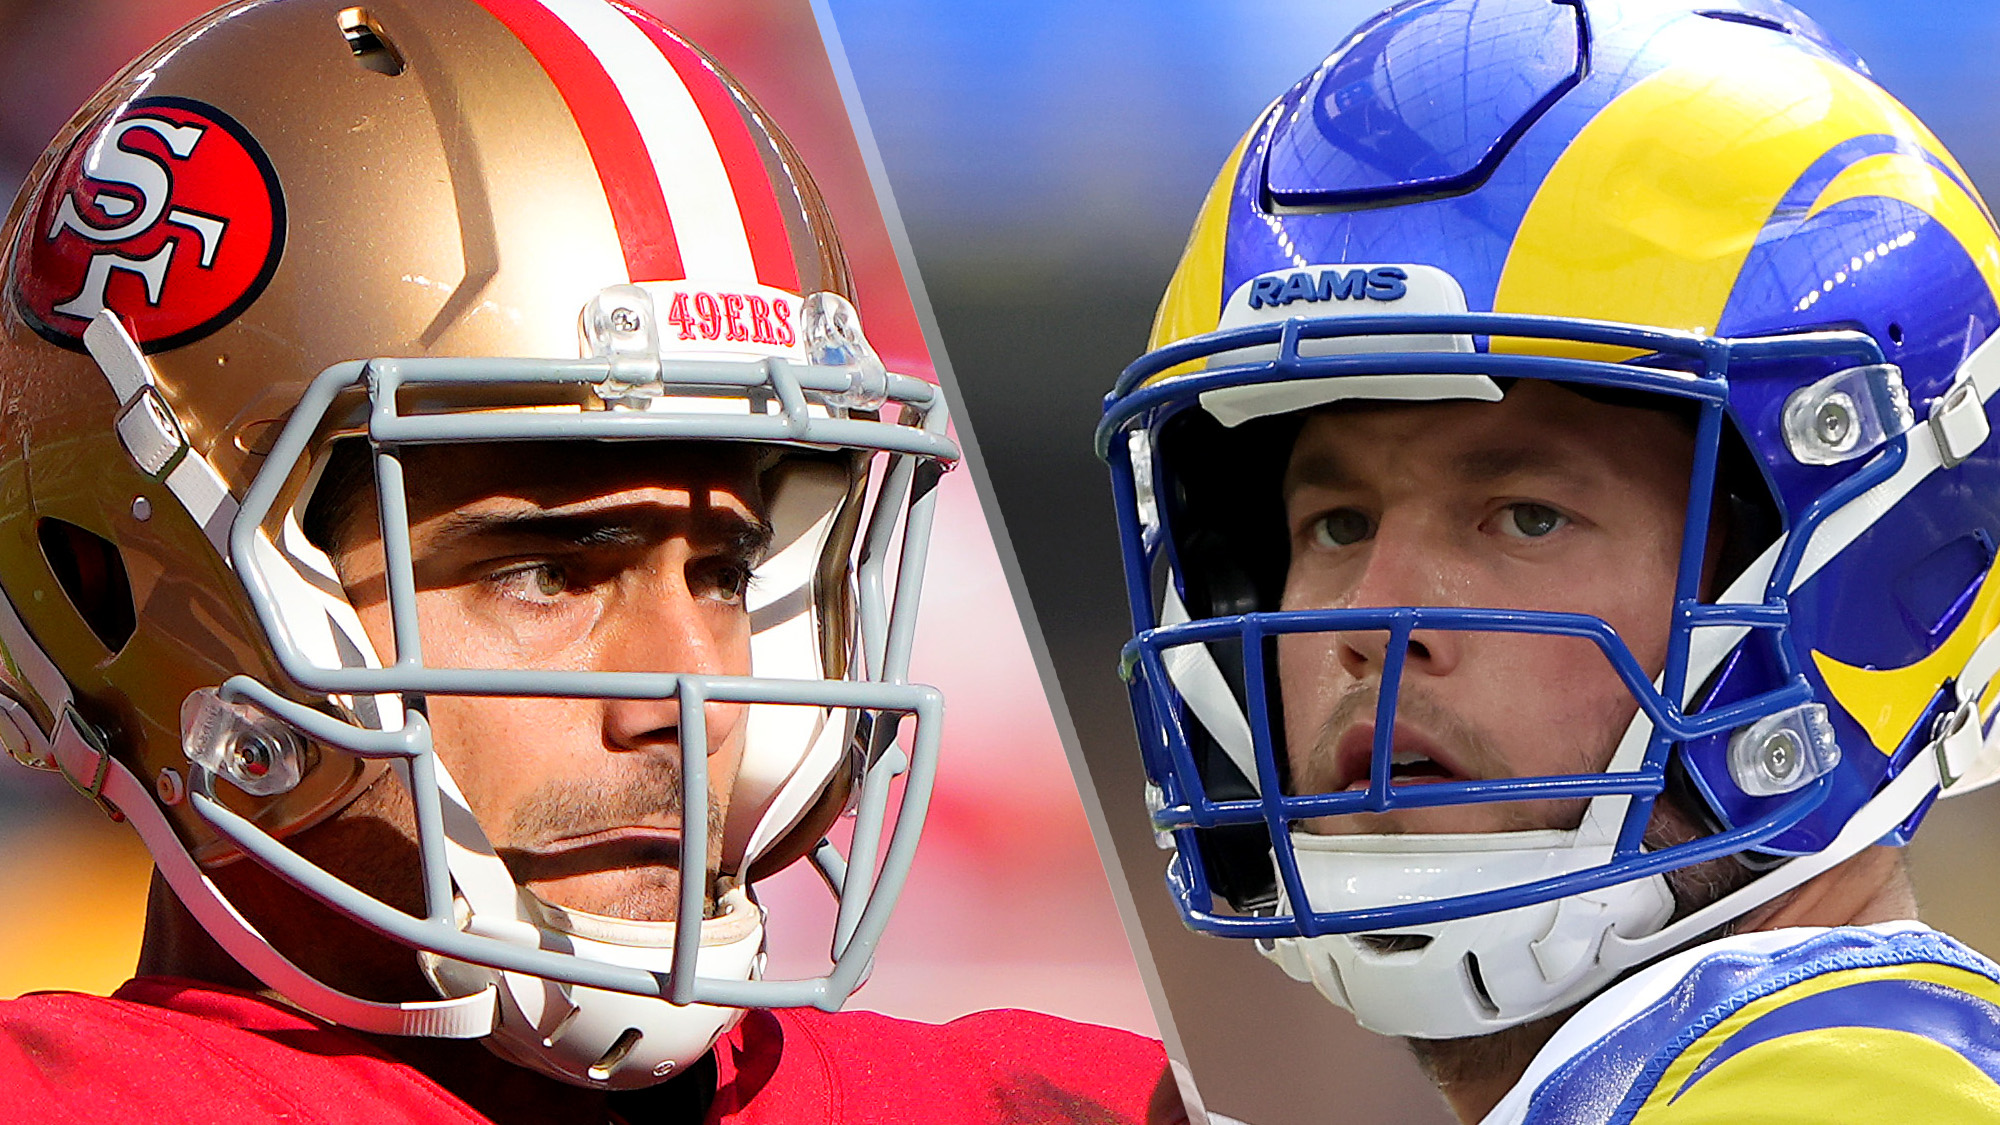 49ers vs Rams live stream: How to watch NFL week 8 online today